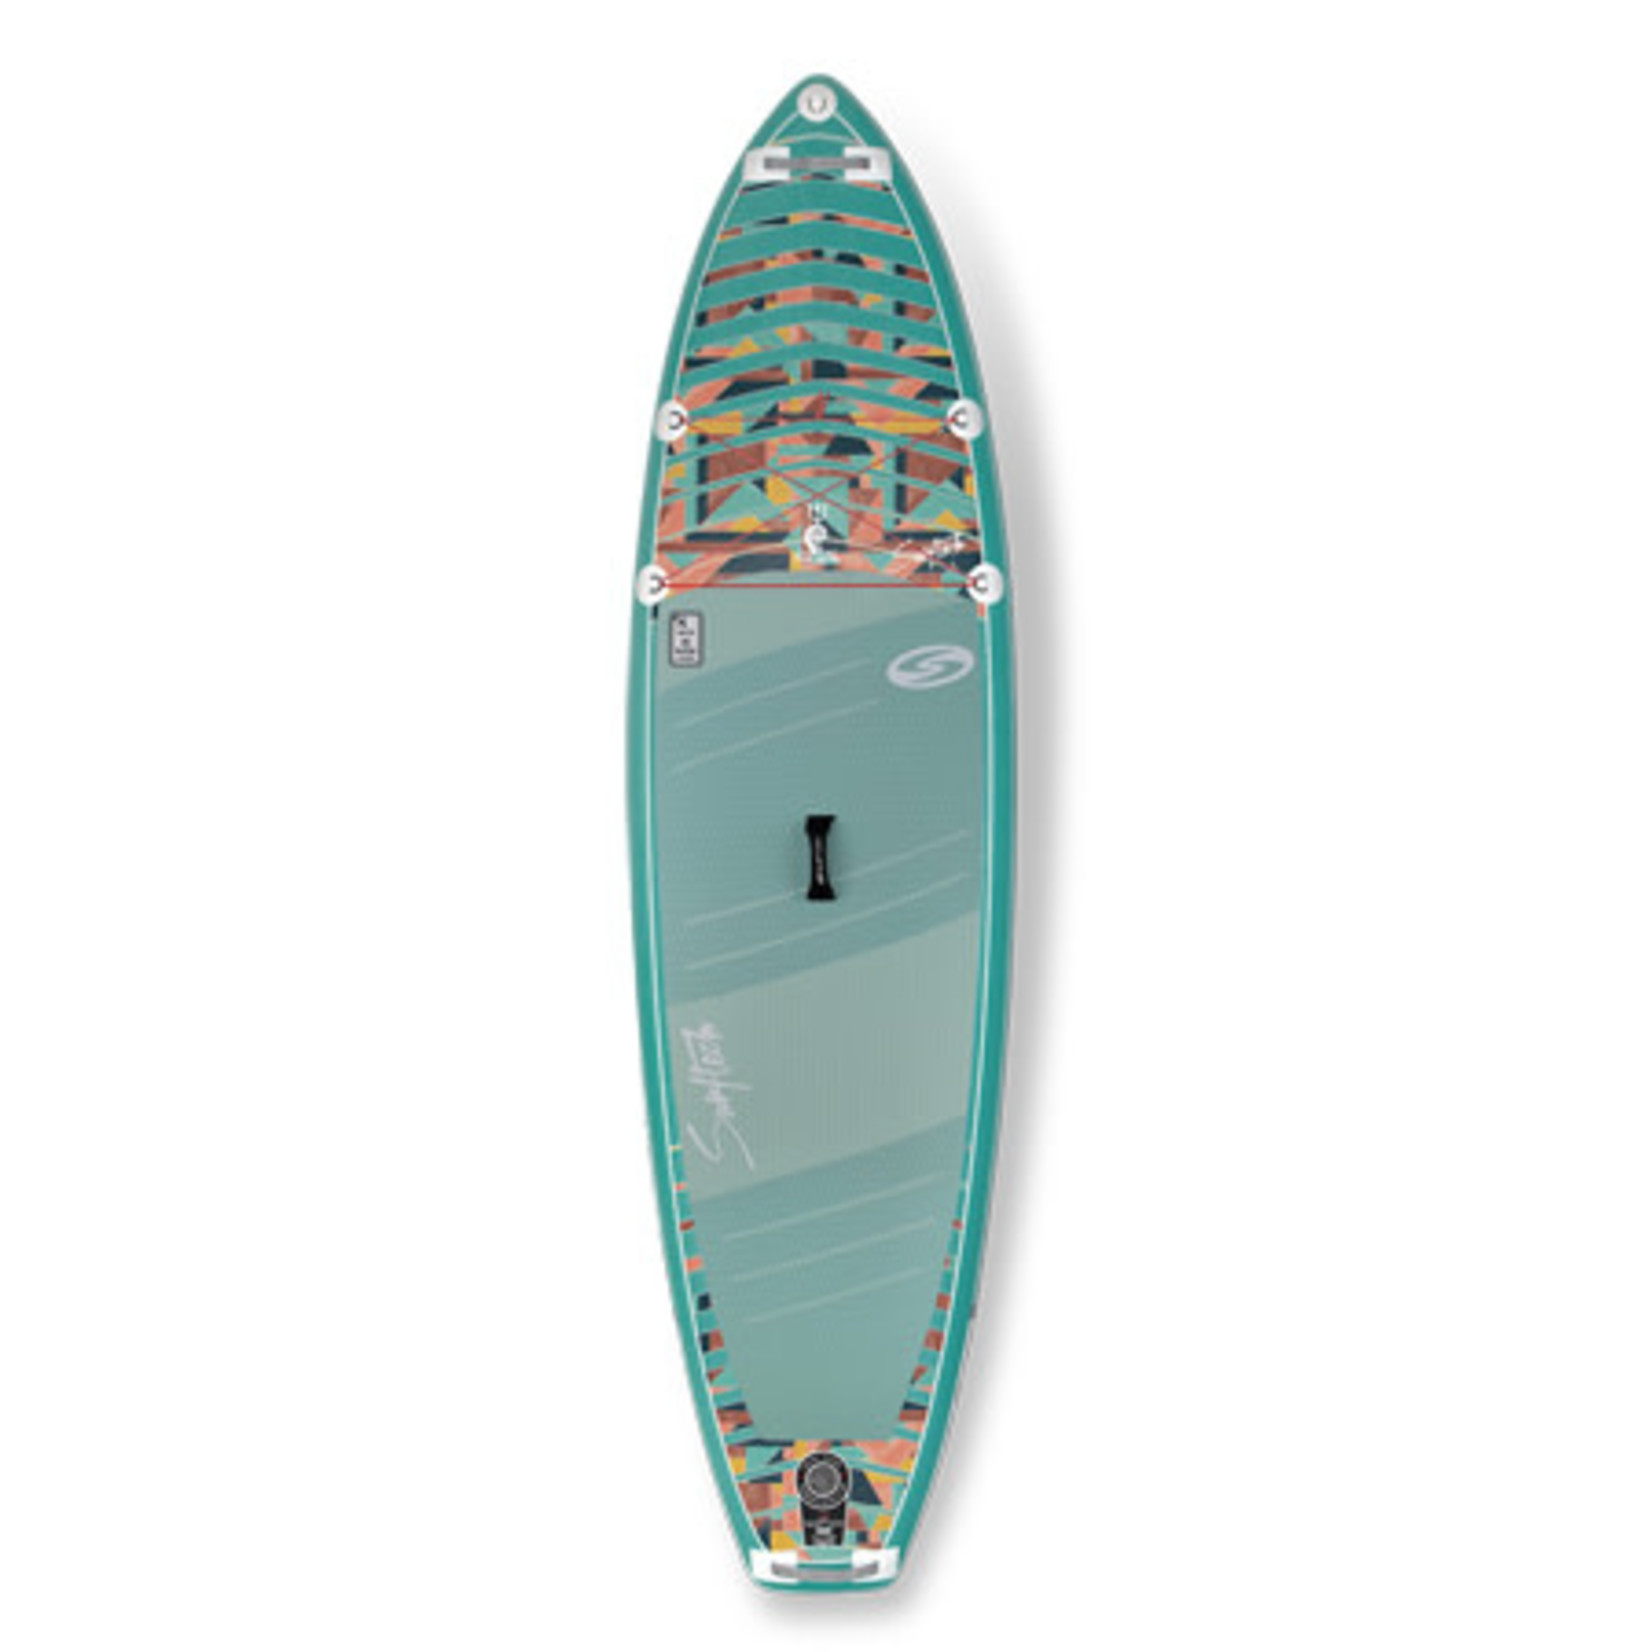 Surftech Air Travel iSUP paddleboard